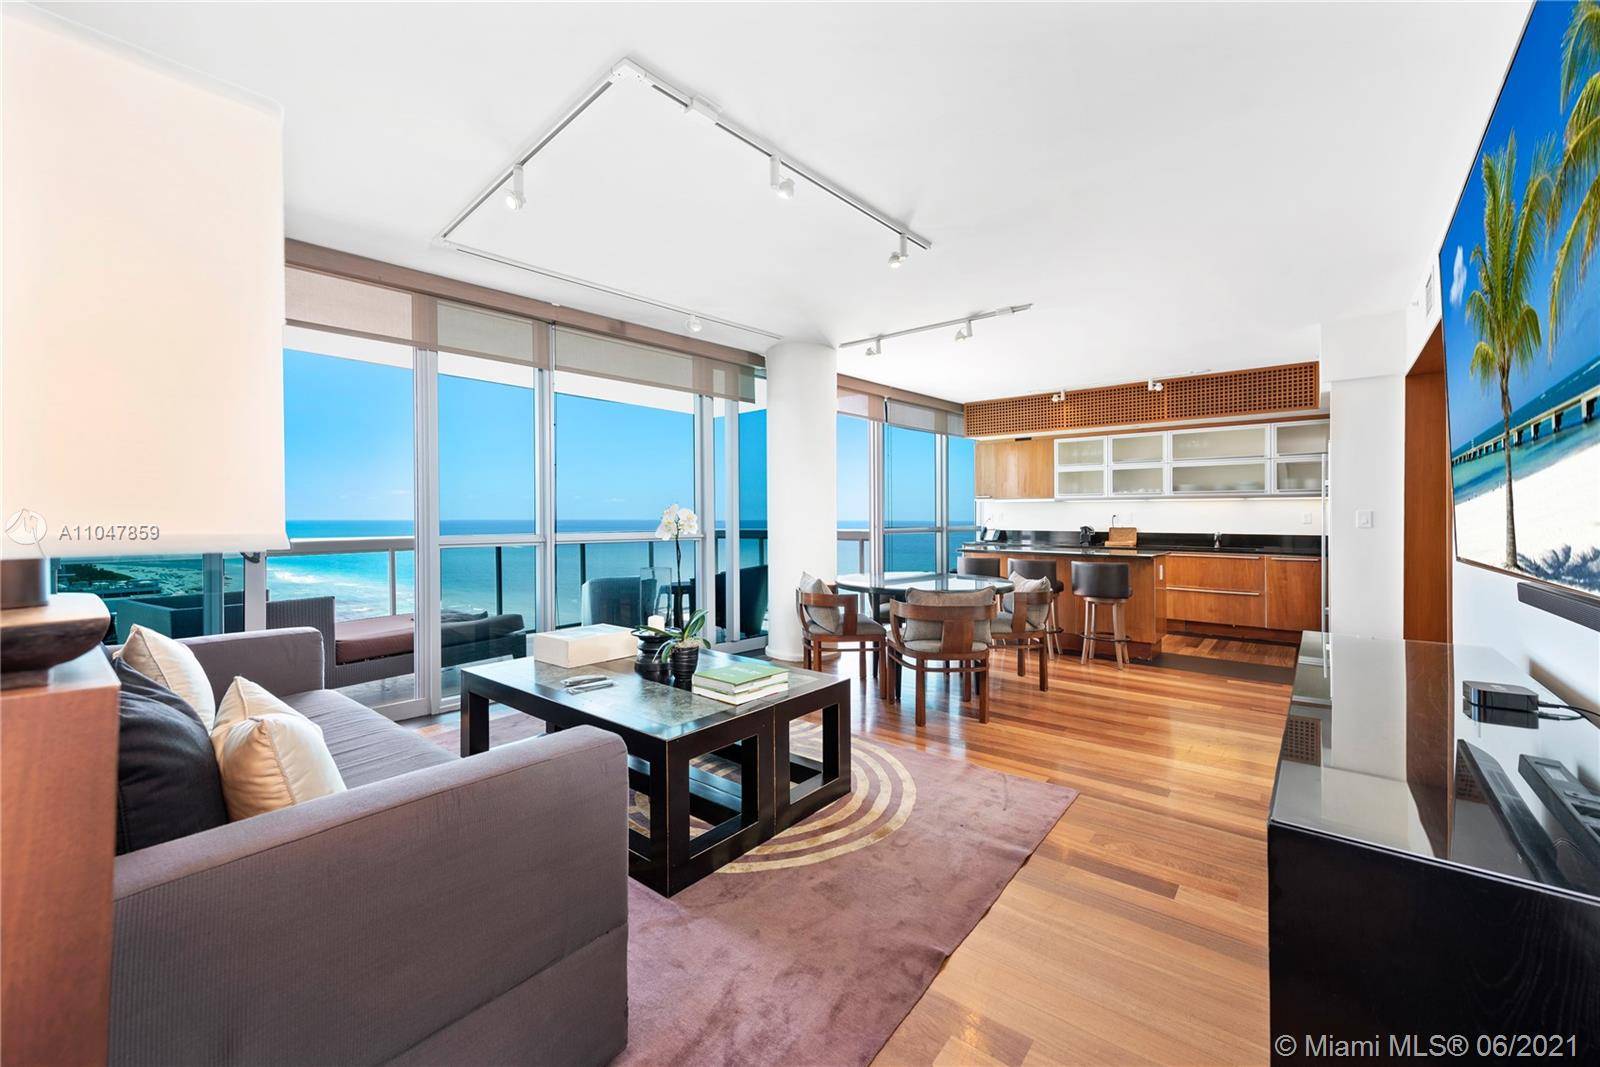 This sought after 3 bedroom hotel residence at the prestigious Setai Resort Residences features breathtaking panoramic views of the Atlantic Ocean Miami Beach coastline.